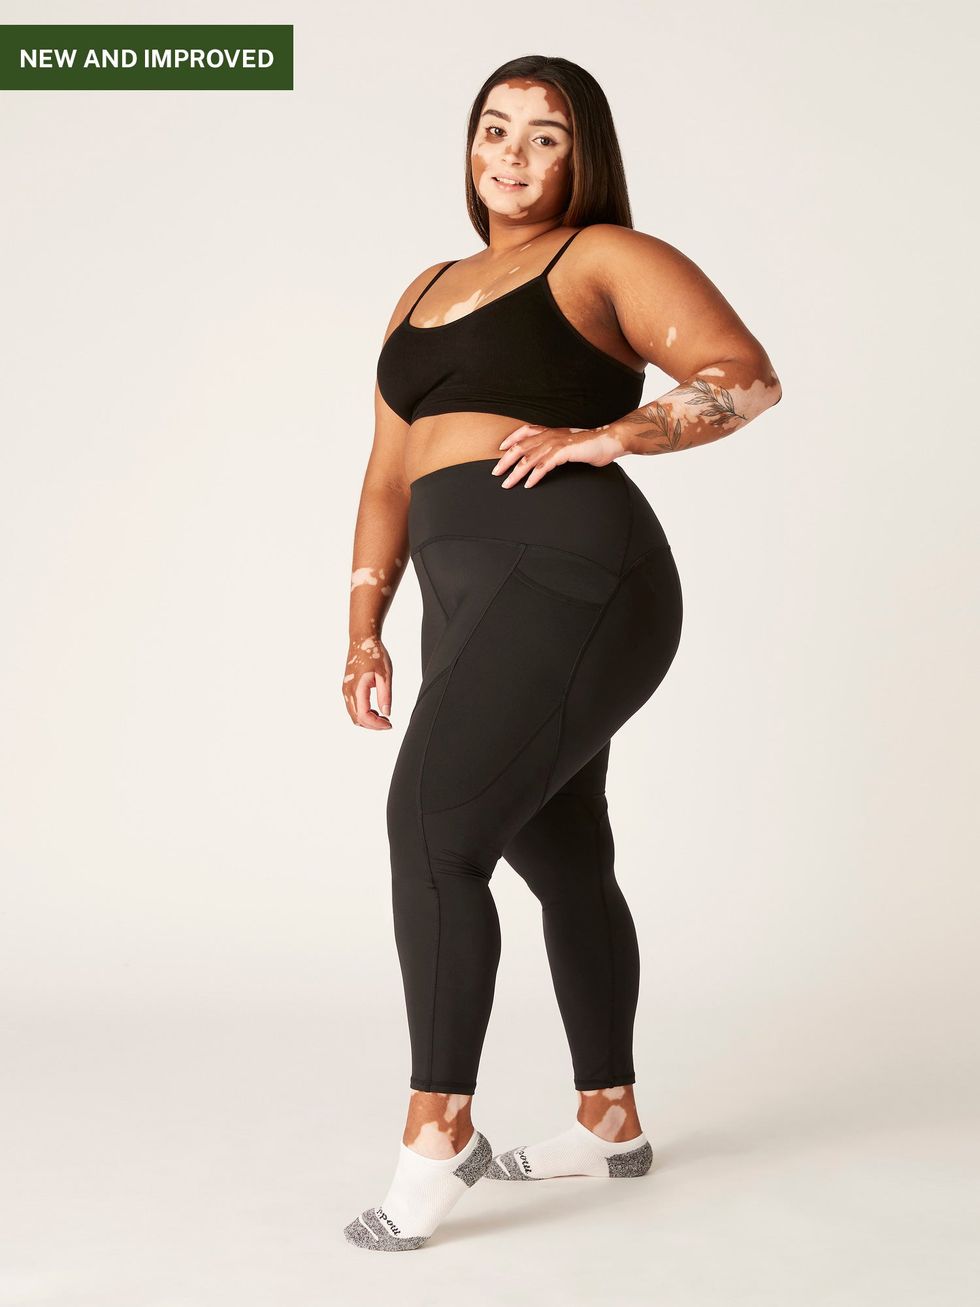 Is That The New Athletic Leggings Breathable Softness M-shaped Seam Booty  Sculpt Wide Waistband Gym Tights With Side Pocket ??